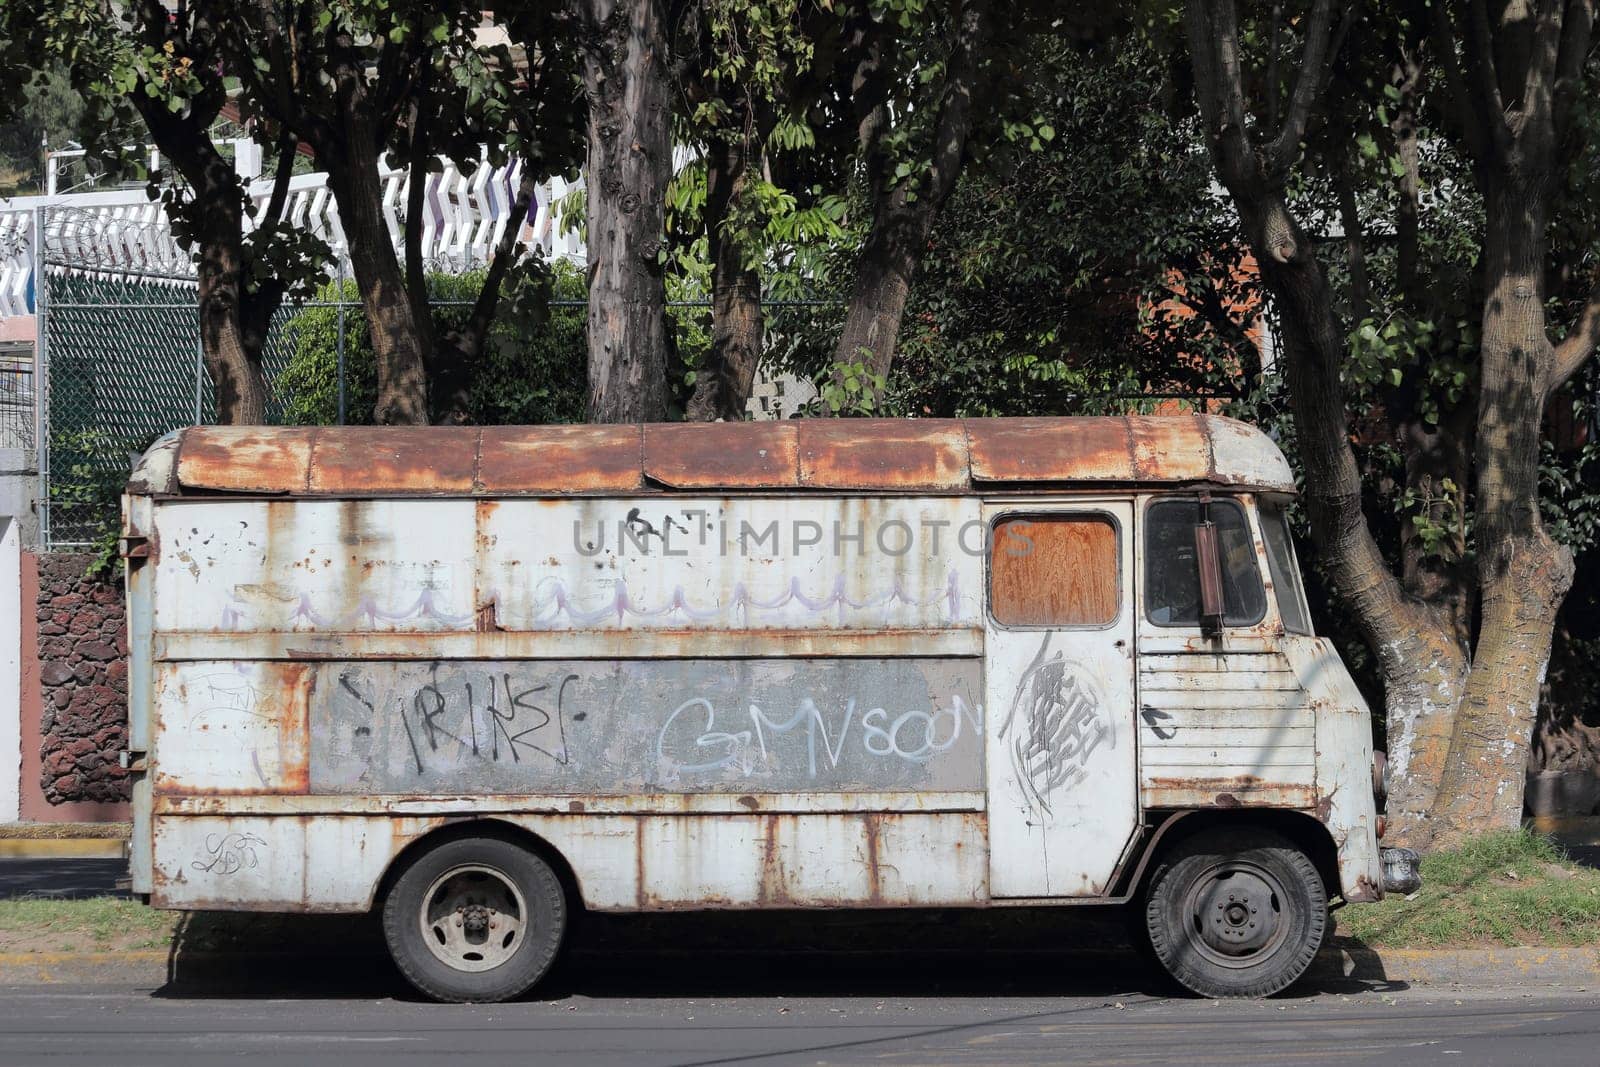 Old rusty bus on the side of the street in Mexico City.